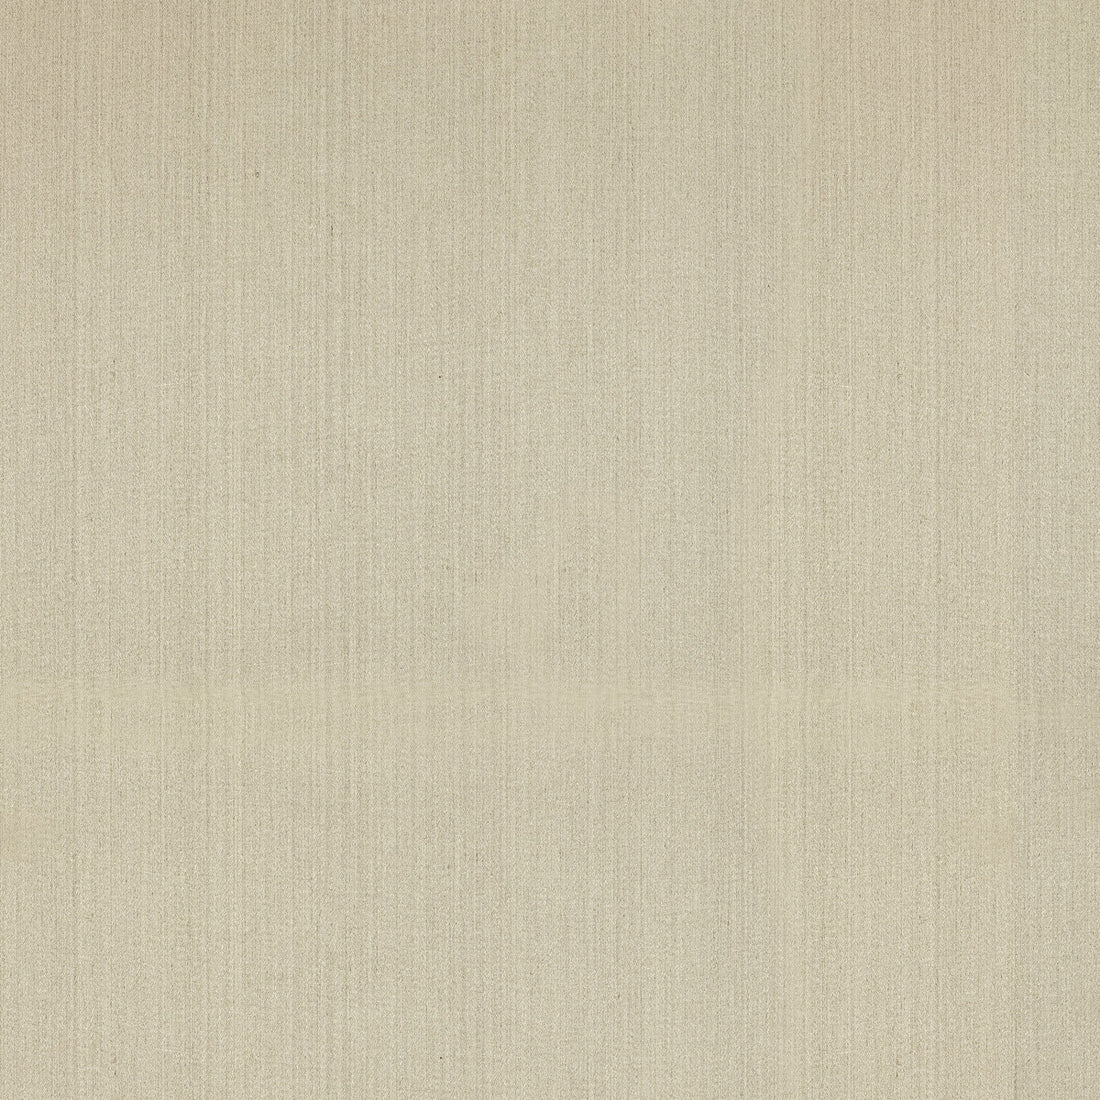 Mica fabric in parchment color - pattern ED85403.225.0 - by Threads in the Quintessential Naturals collection